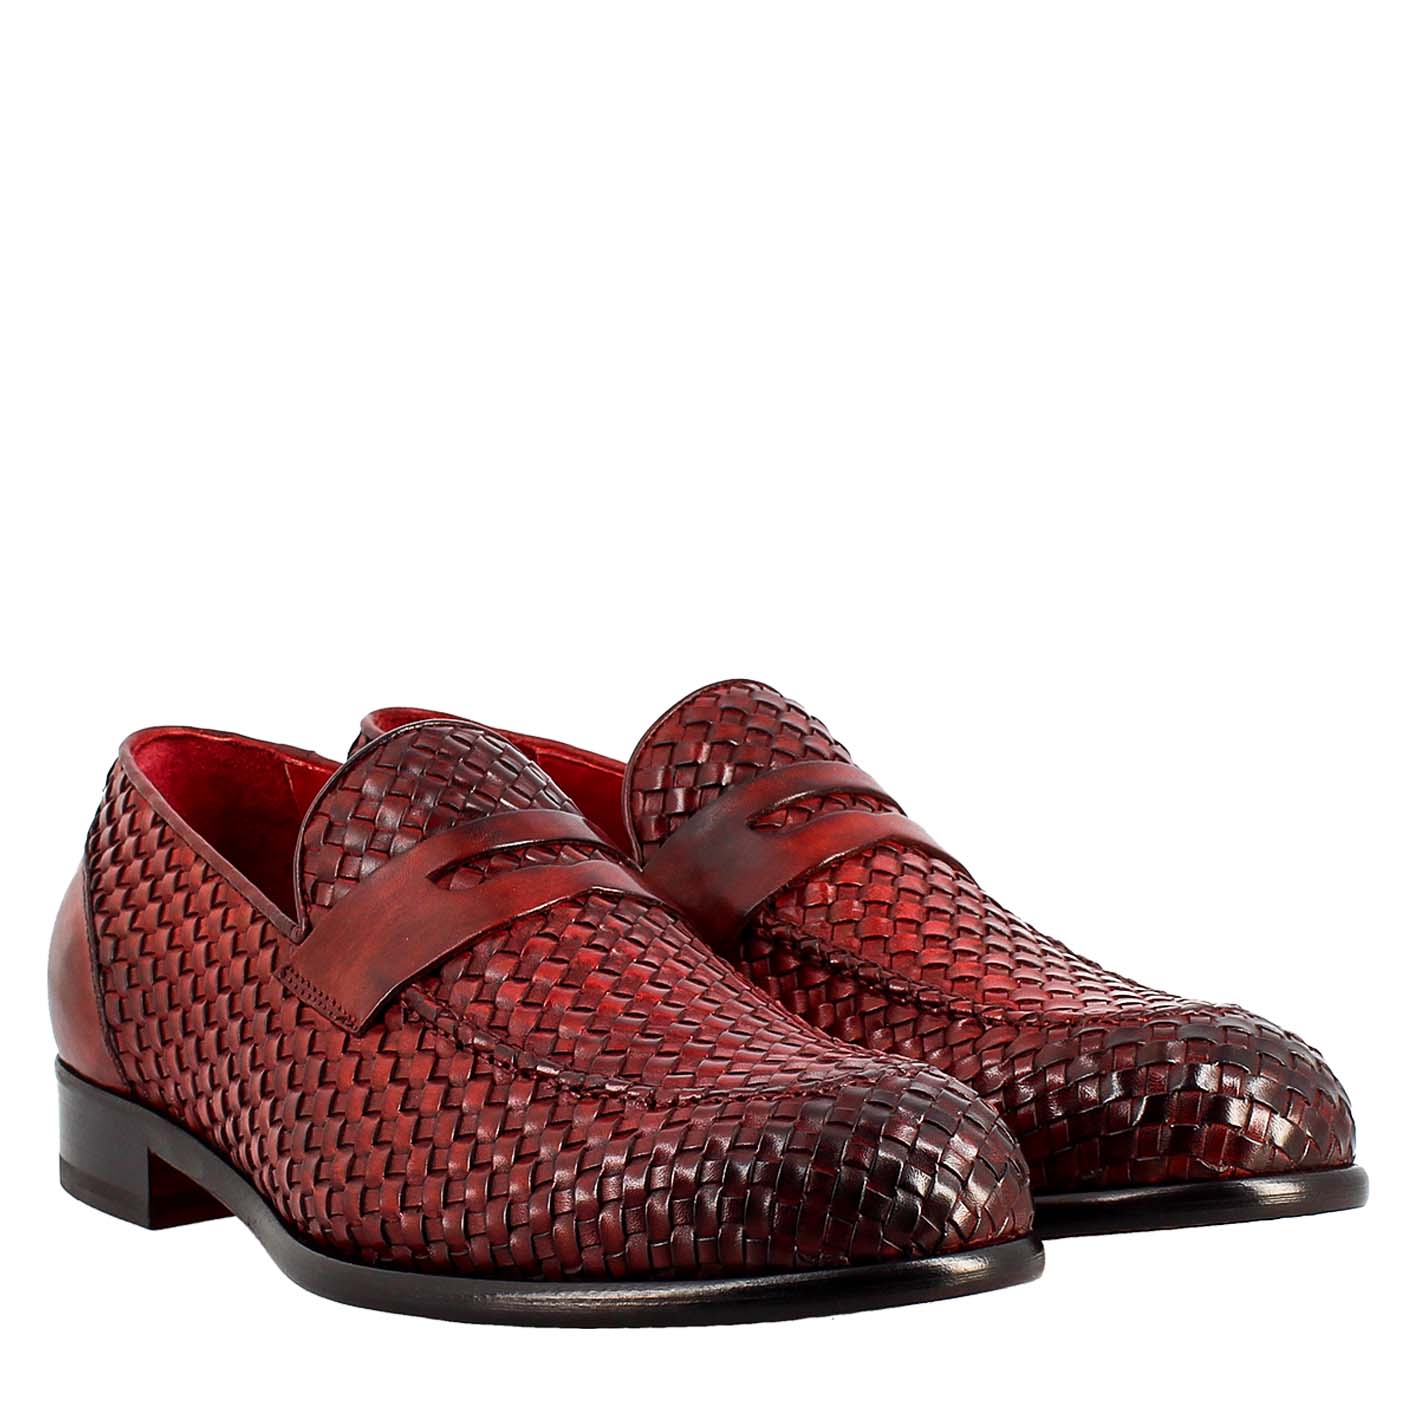 Il Rosso - Red Bottom Sole Leather Oxford Shoes for Men Red / 44